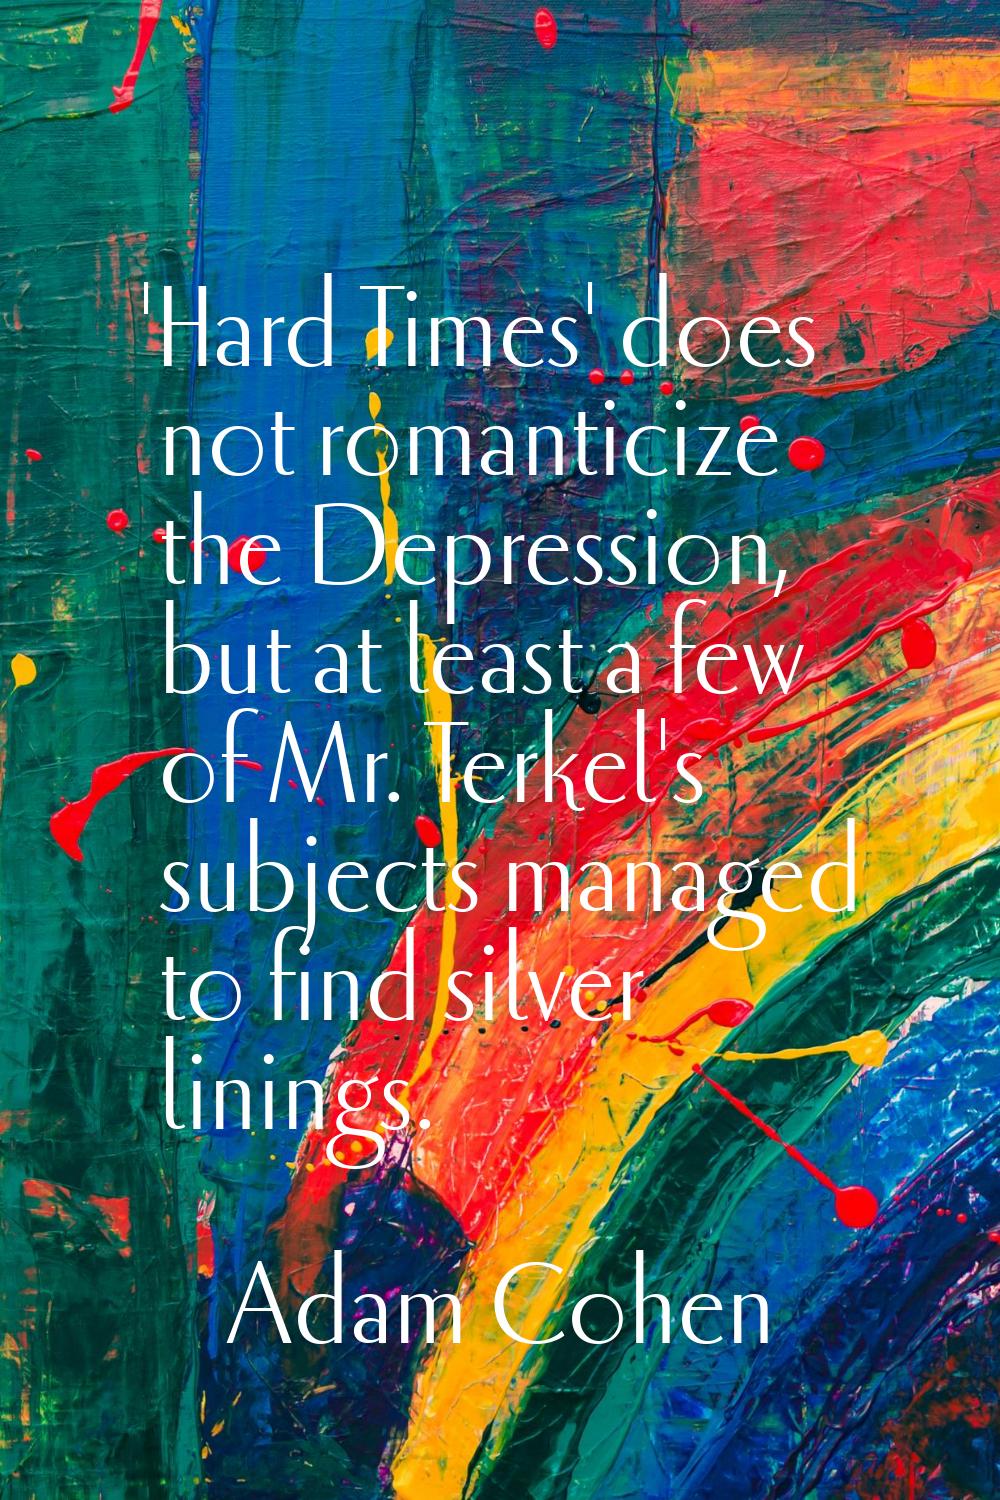 'Hard Times' does not romanticize the Depression, but at least a few of Mr. Terkel's subjects manag